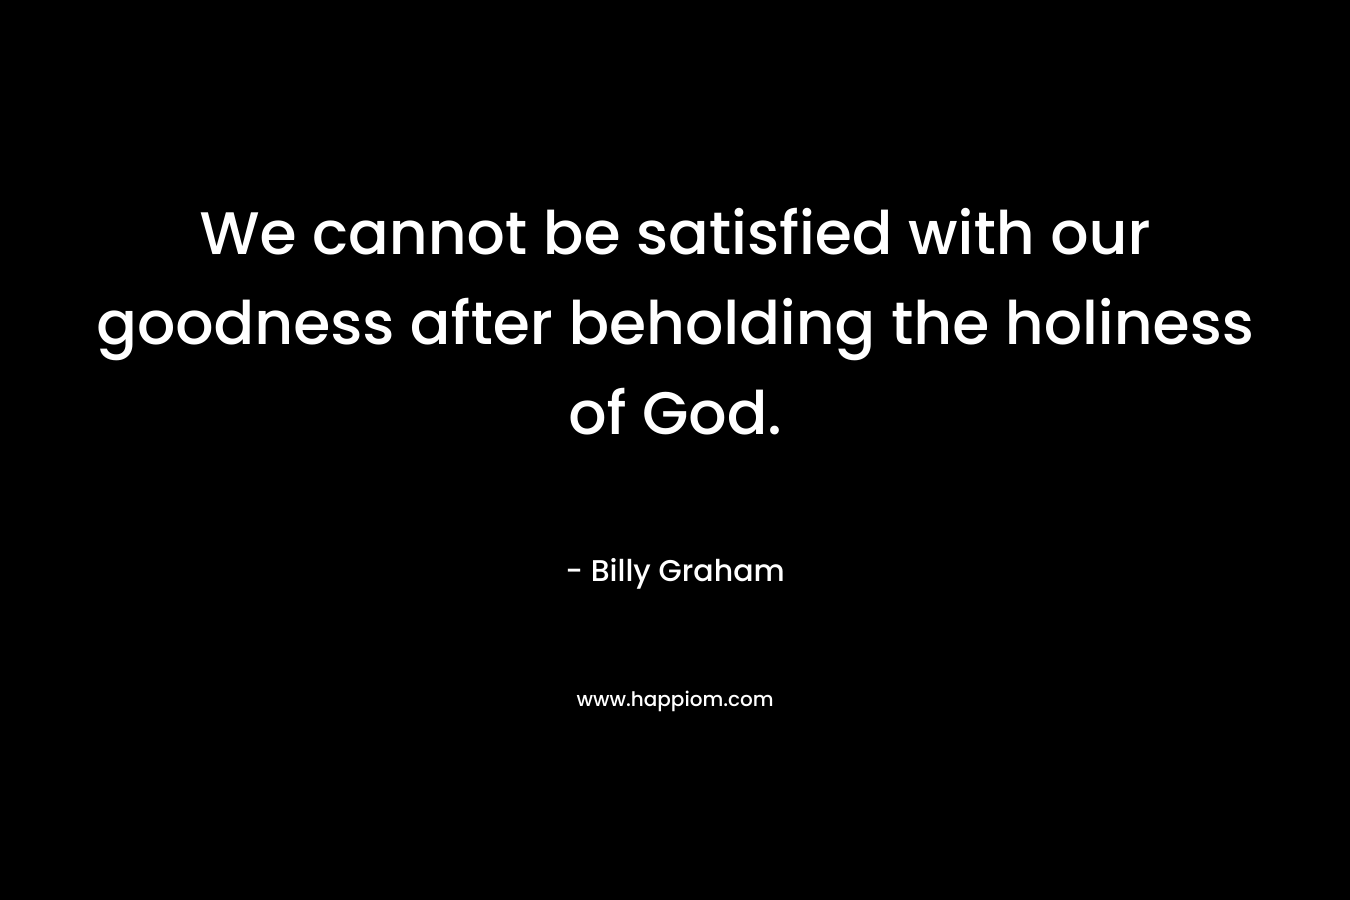 We cannot be satisfied with our goodness after beholding the holiness of God.